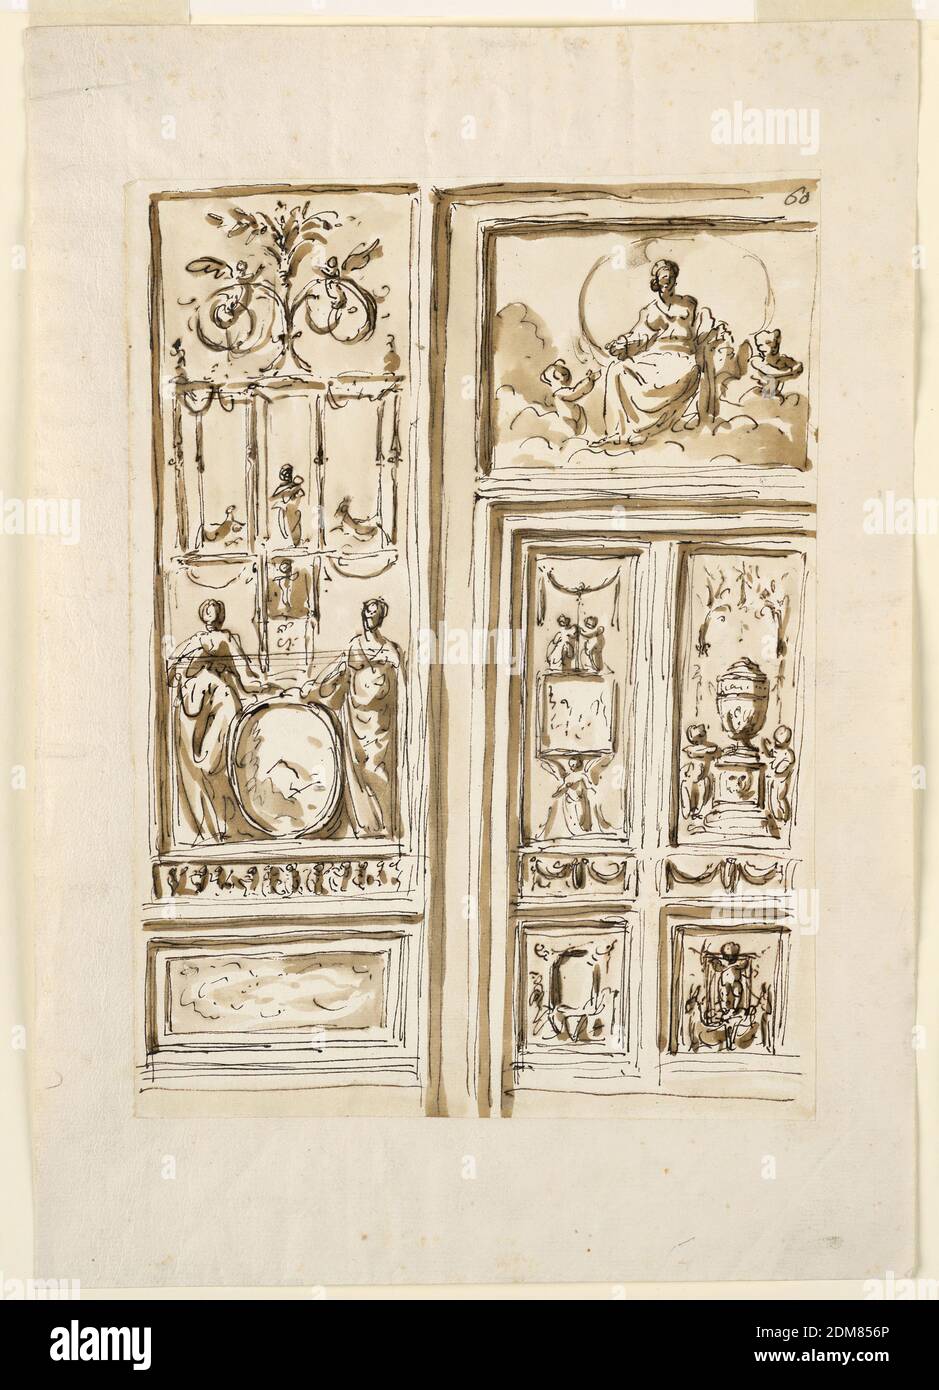 Design for Door and Adjoining Wall Panel Decorations, Giuseppe Barberi, Italian, 1746–1809, Pen and brown ink, brush and brown wash on off-white laid paper, lined, Rectangular panels with classical motifs including rinceaux, columns, urns, and swags. The overdoor features the Virgin on the Crescent (?) with a putto., Rome, Italy, 1746–1809, interiors, Drawing Stock Photo